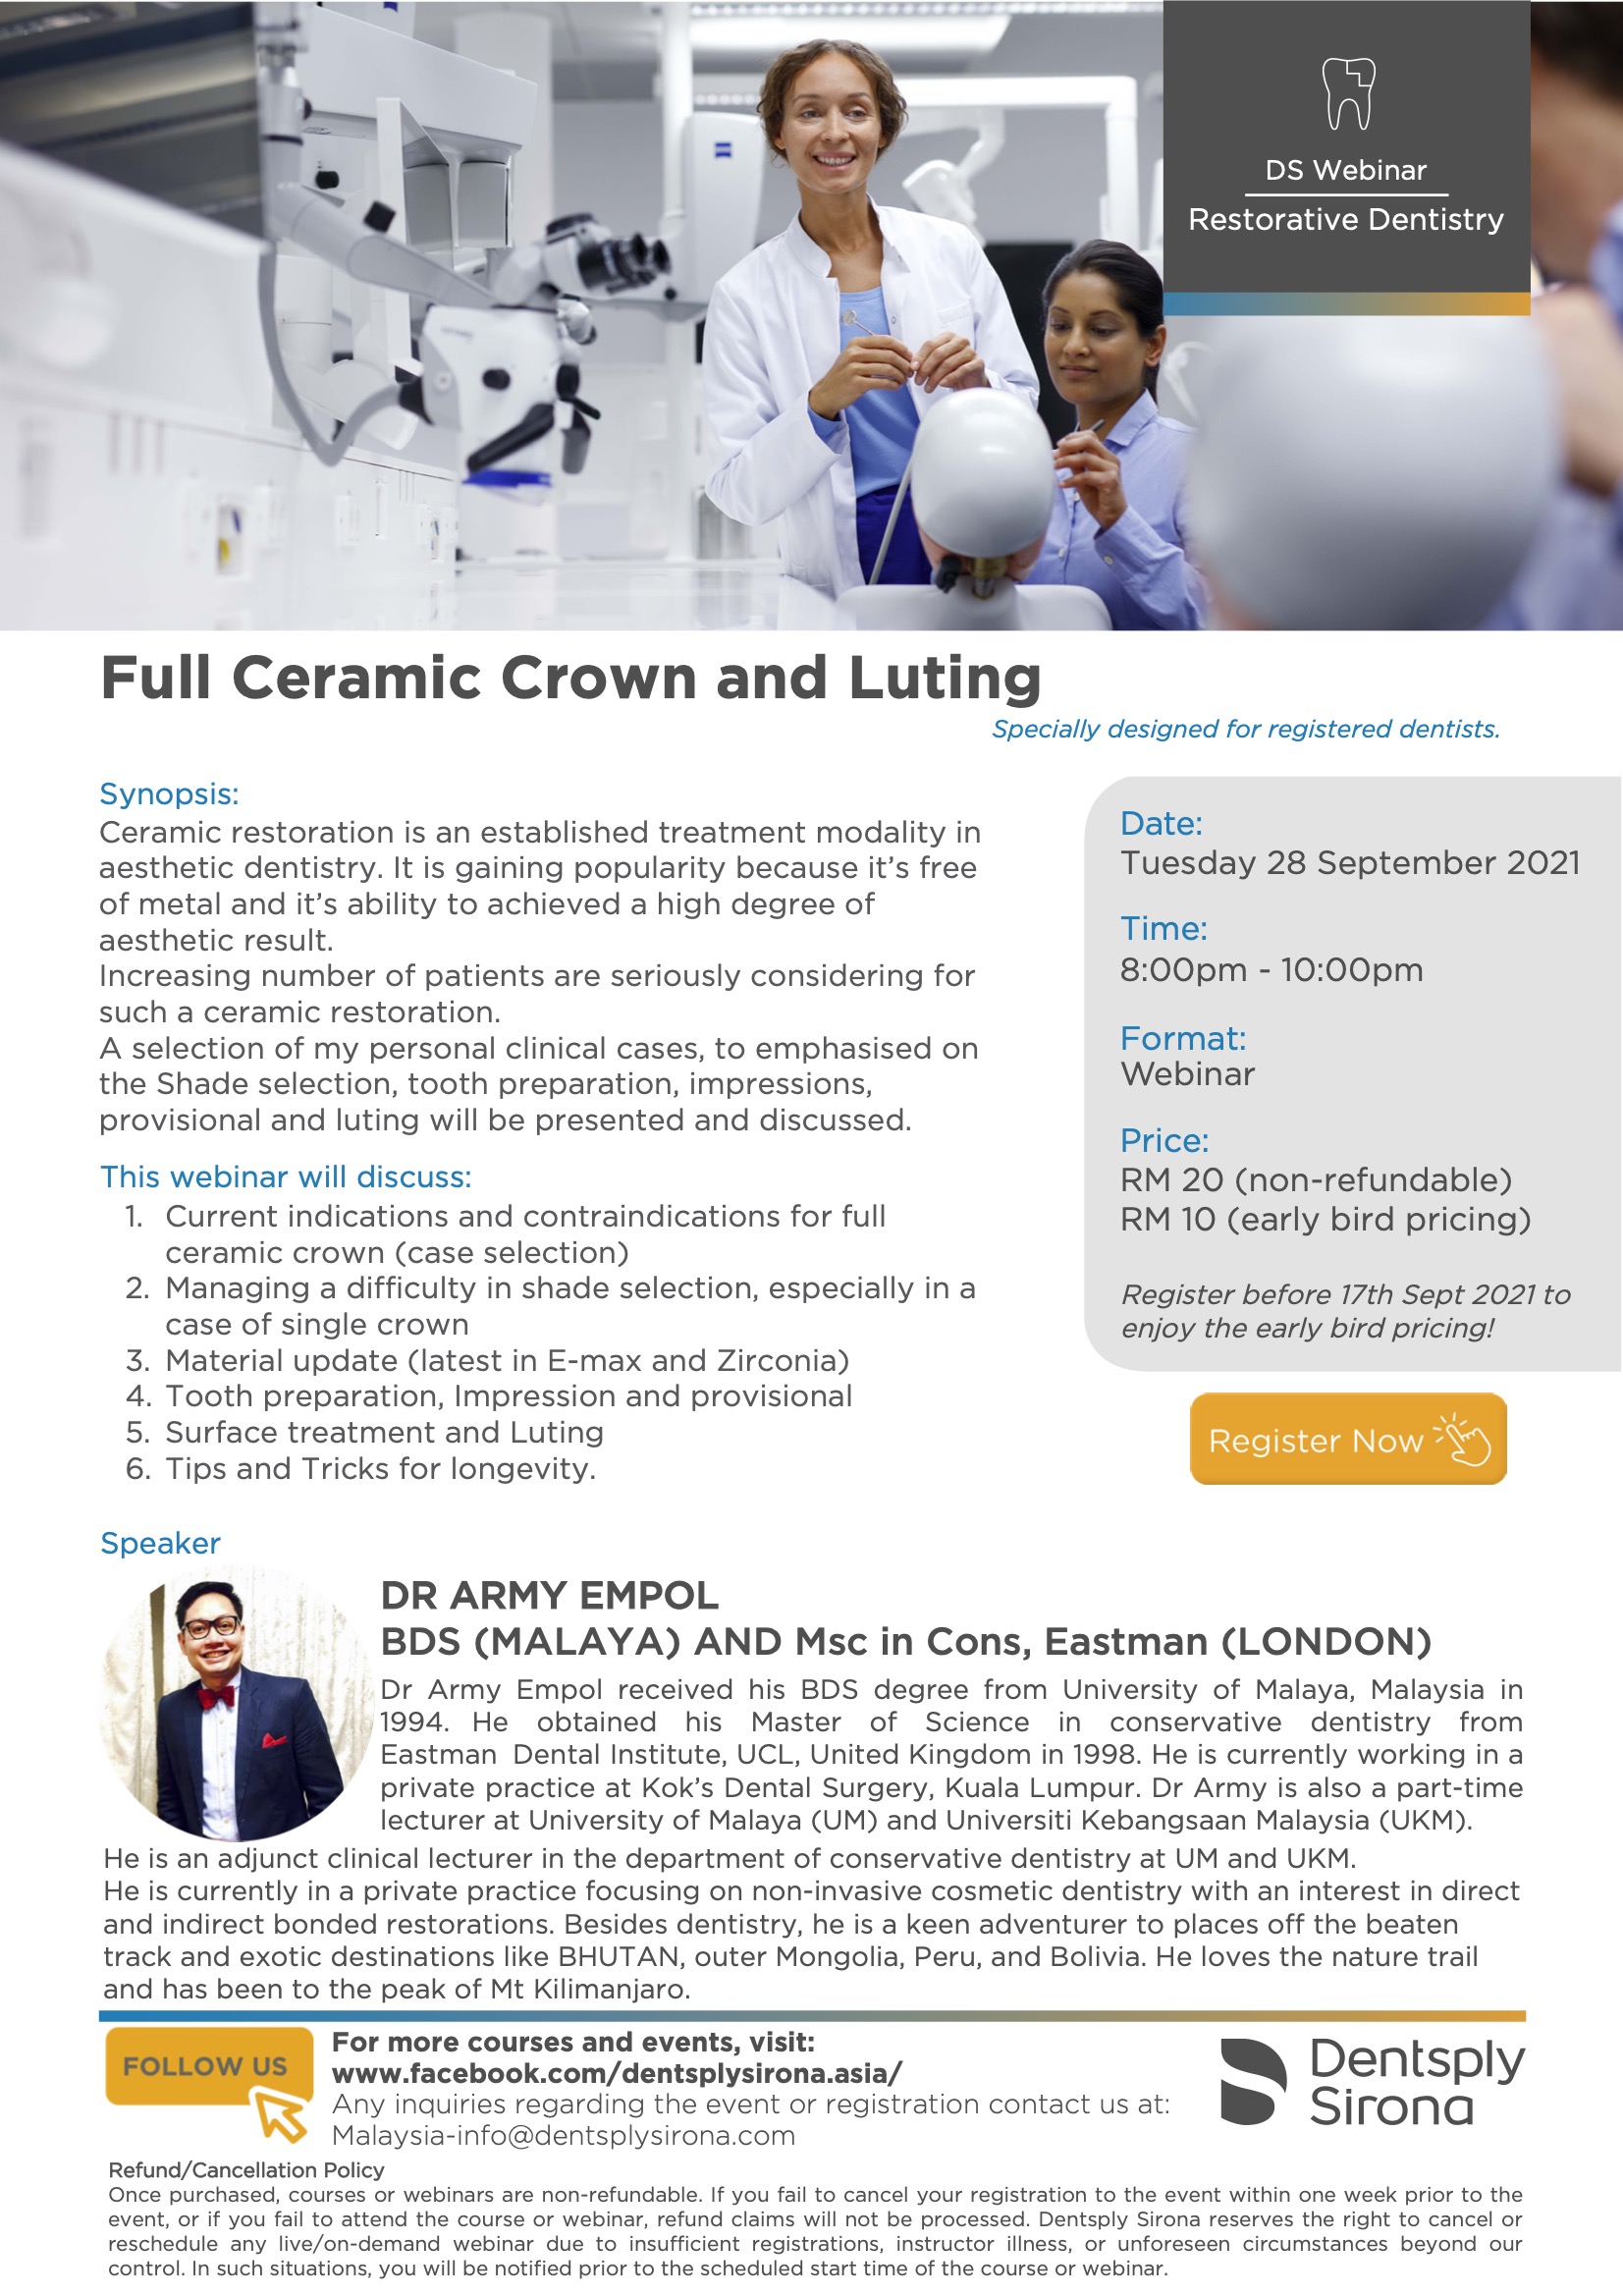 Full Ceramic Crown and Luting with Dr Army Empol-1